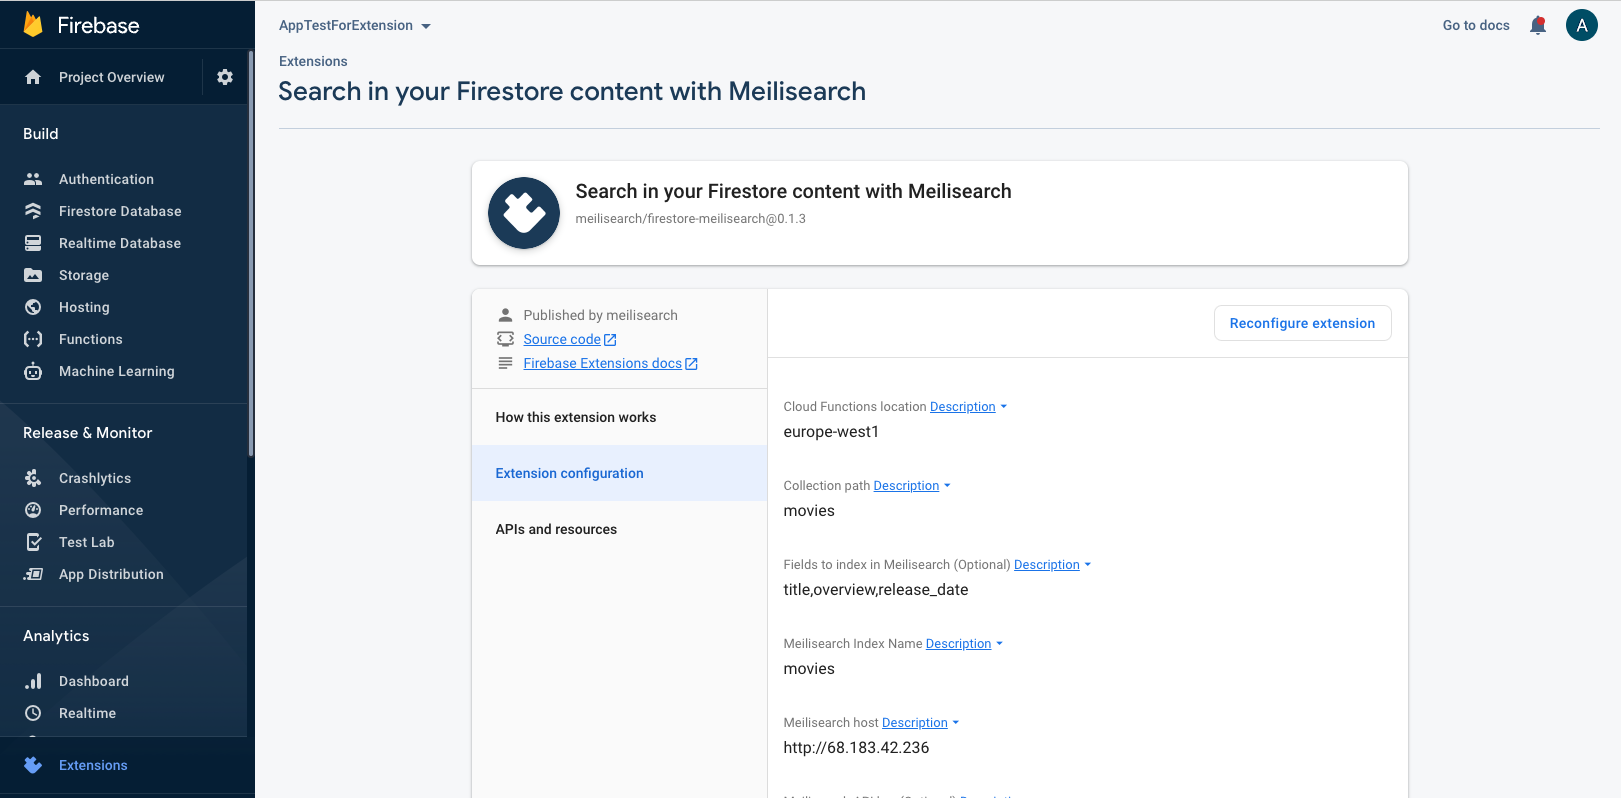 Configuring the Meilisearch extension for Firebase